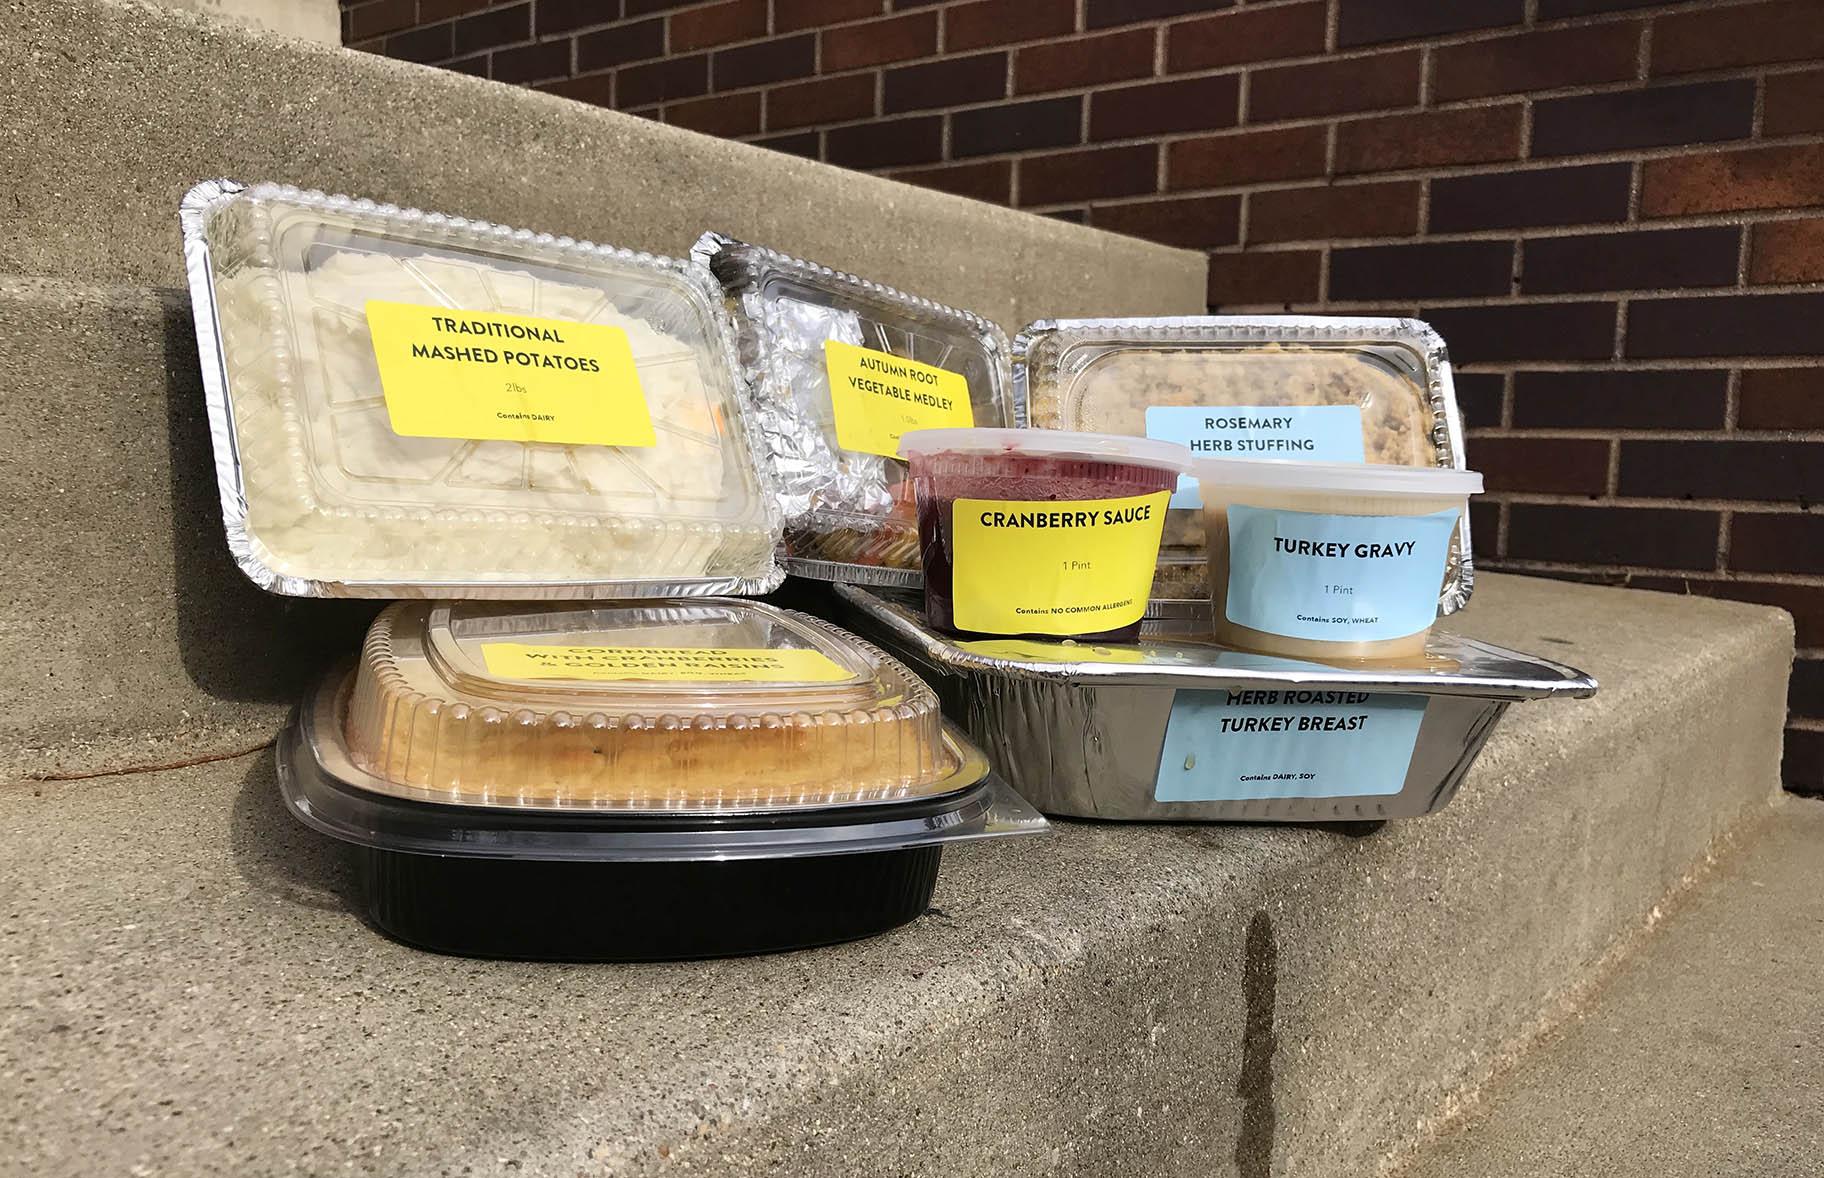 The boxes have all the traditional Thanksgiving goodies: mashed potatoes, cornbread, stuffing, cranberry sauce, gravy, a vegetable medley and 3.5-pound turkey. (Ariel Parrella-Aureli / WTTW News)